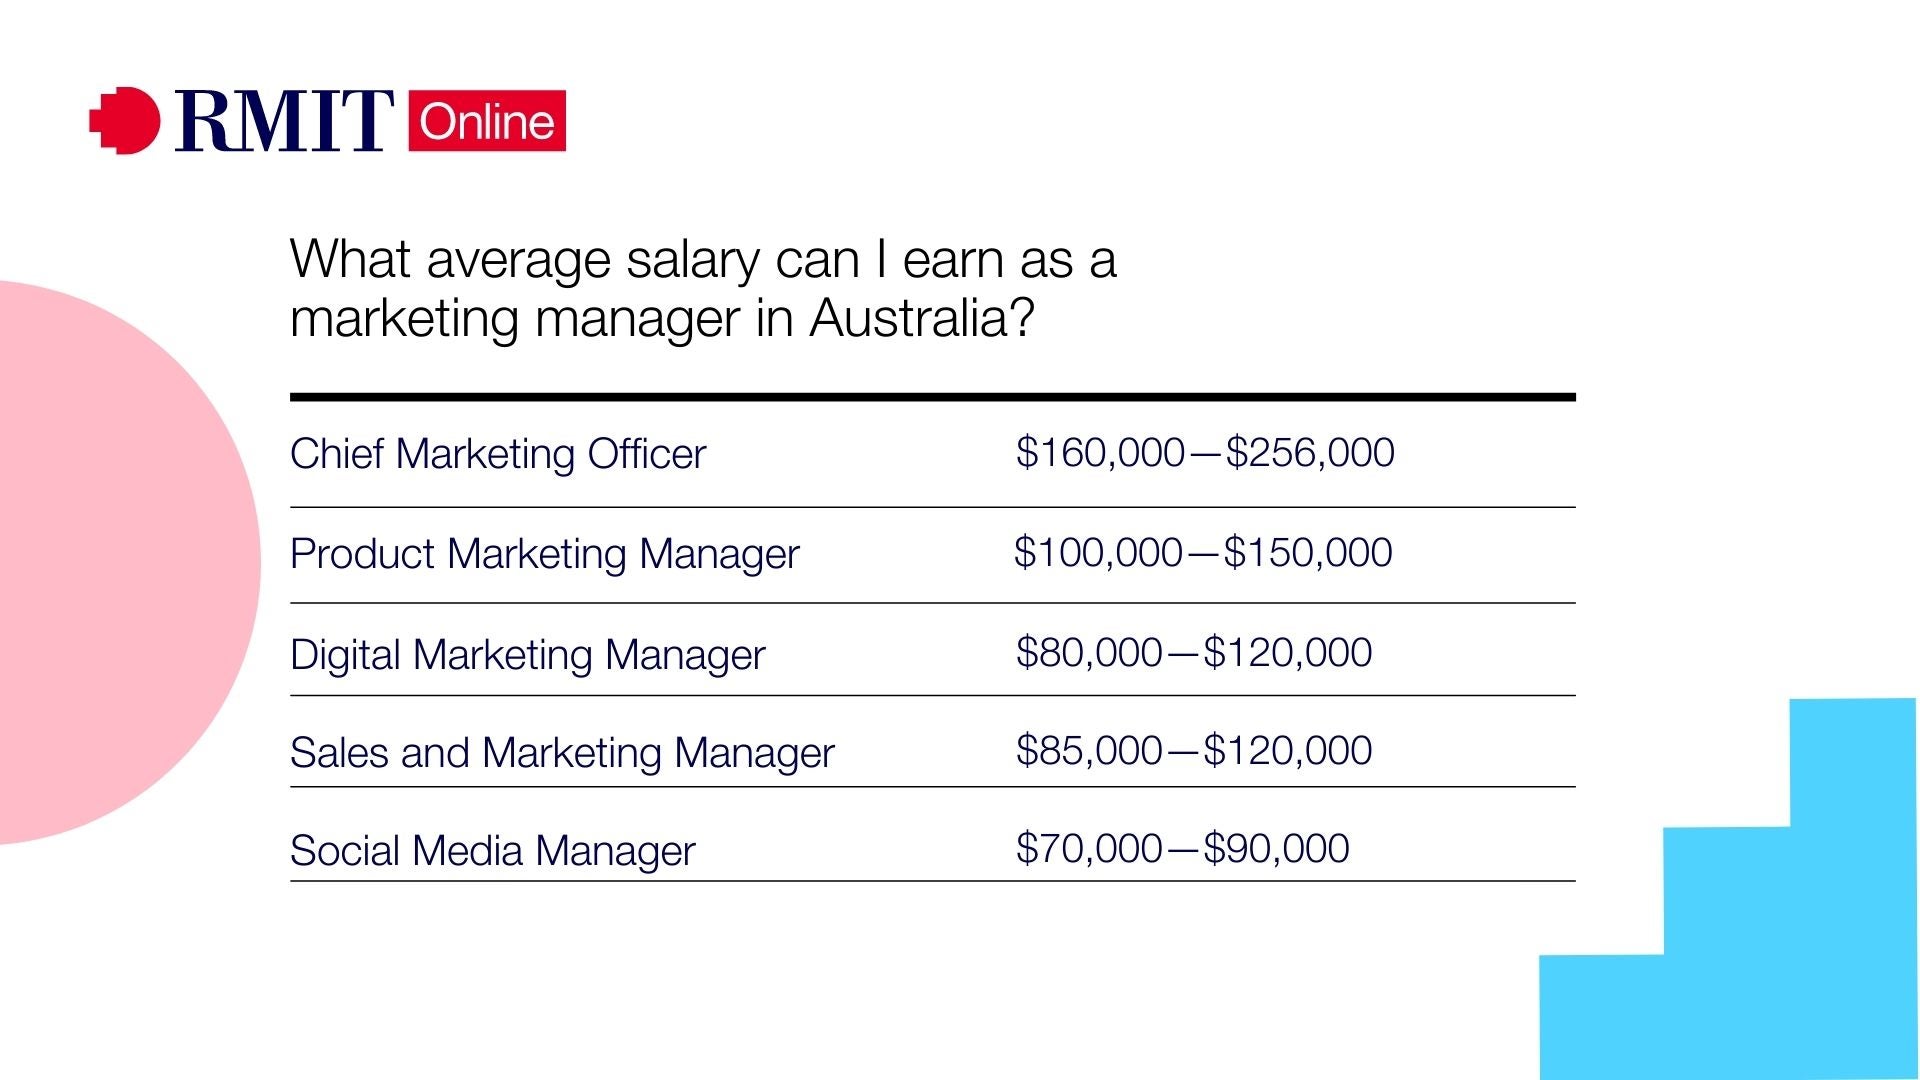 What Salary Can I Earn as a Marketing Manager? RMIT Online